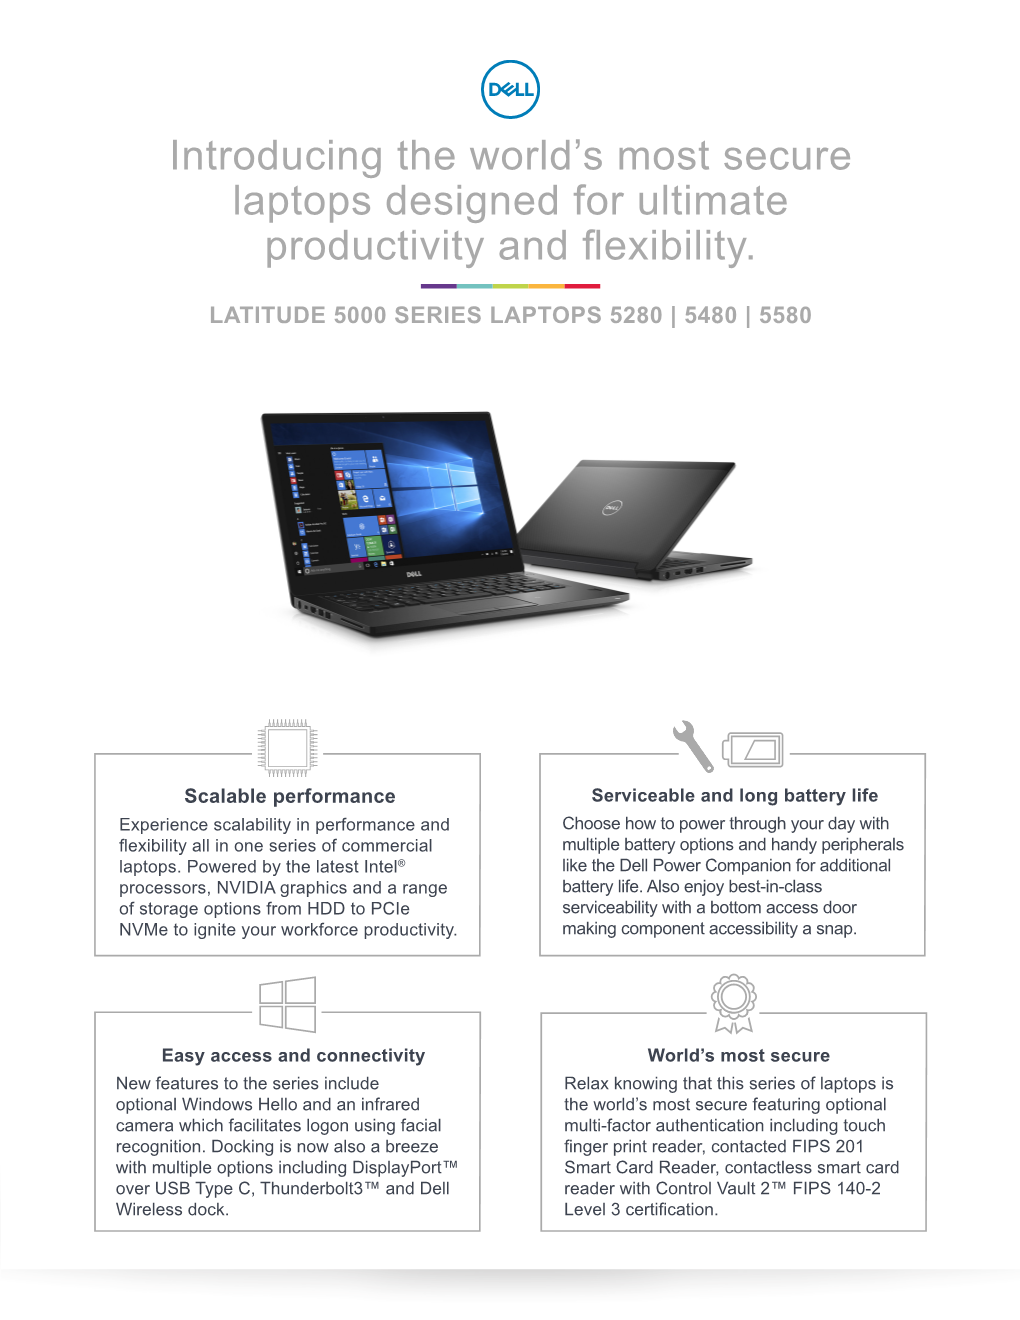 Introducing the World's Most Secure Laptops Designed for Ultimate